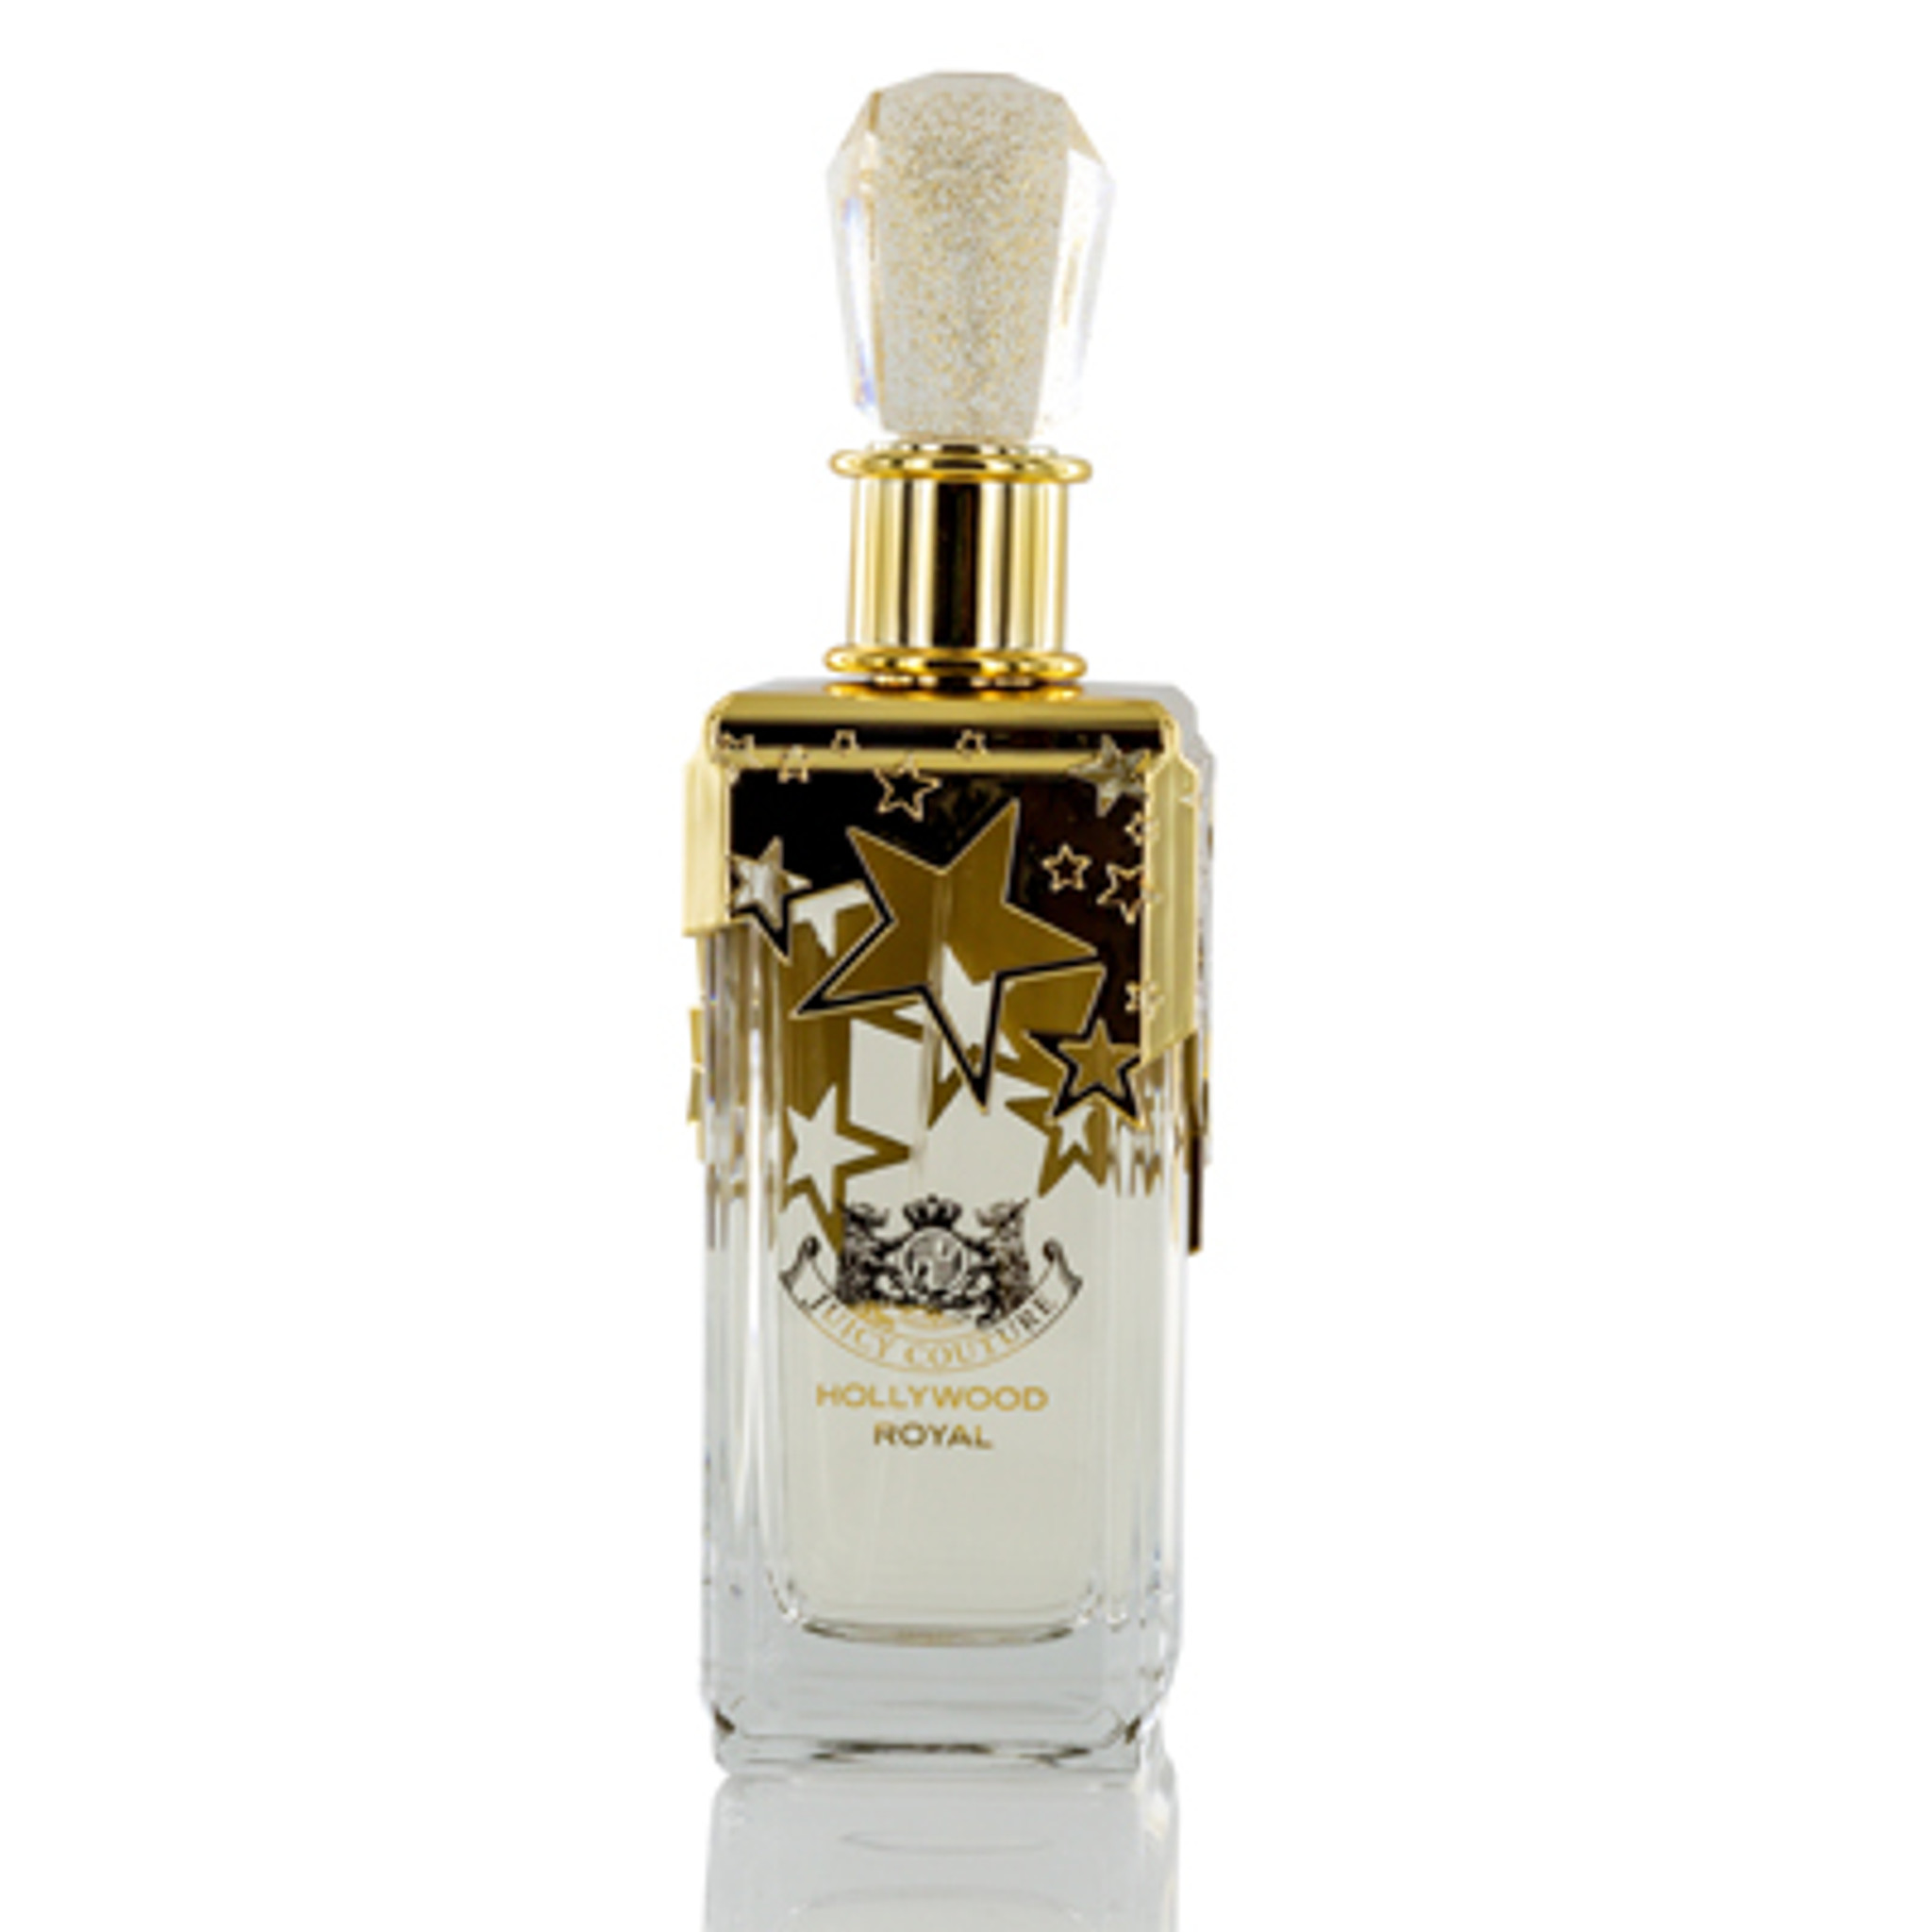 Hollywood royal/juicy couture edt spray 5,0 oz (150 (b)